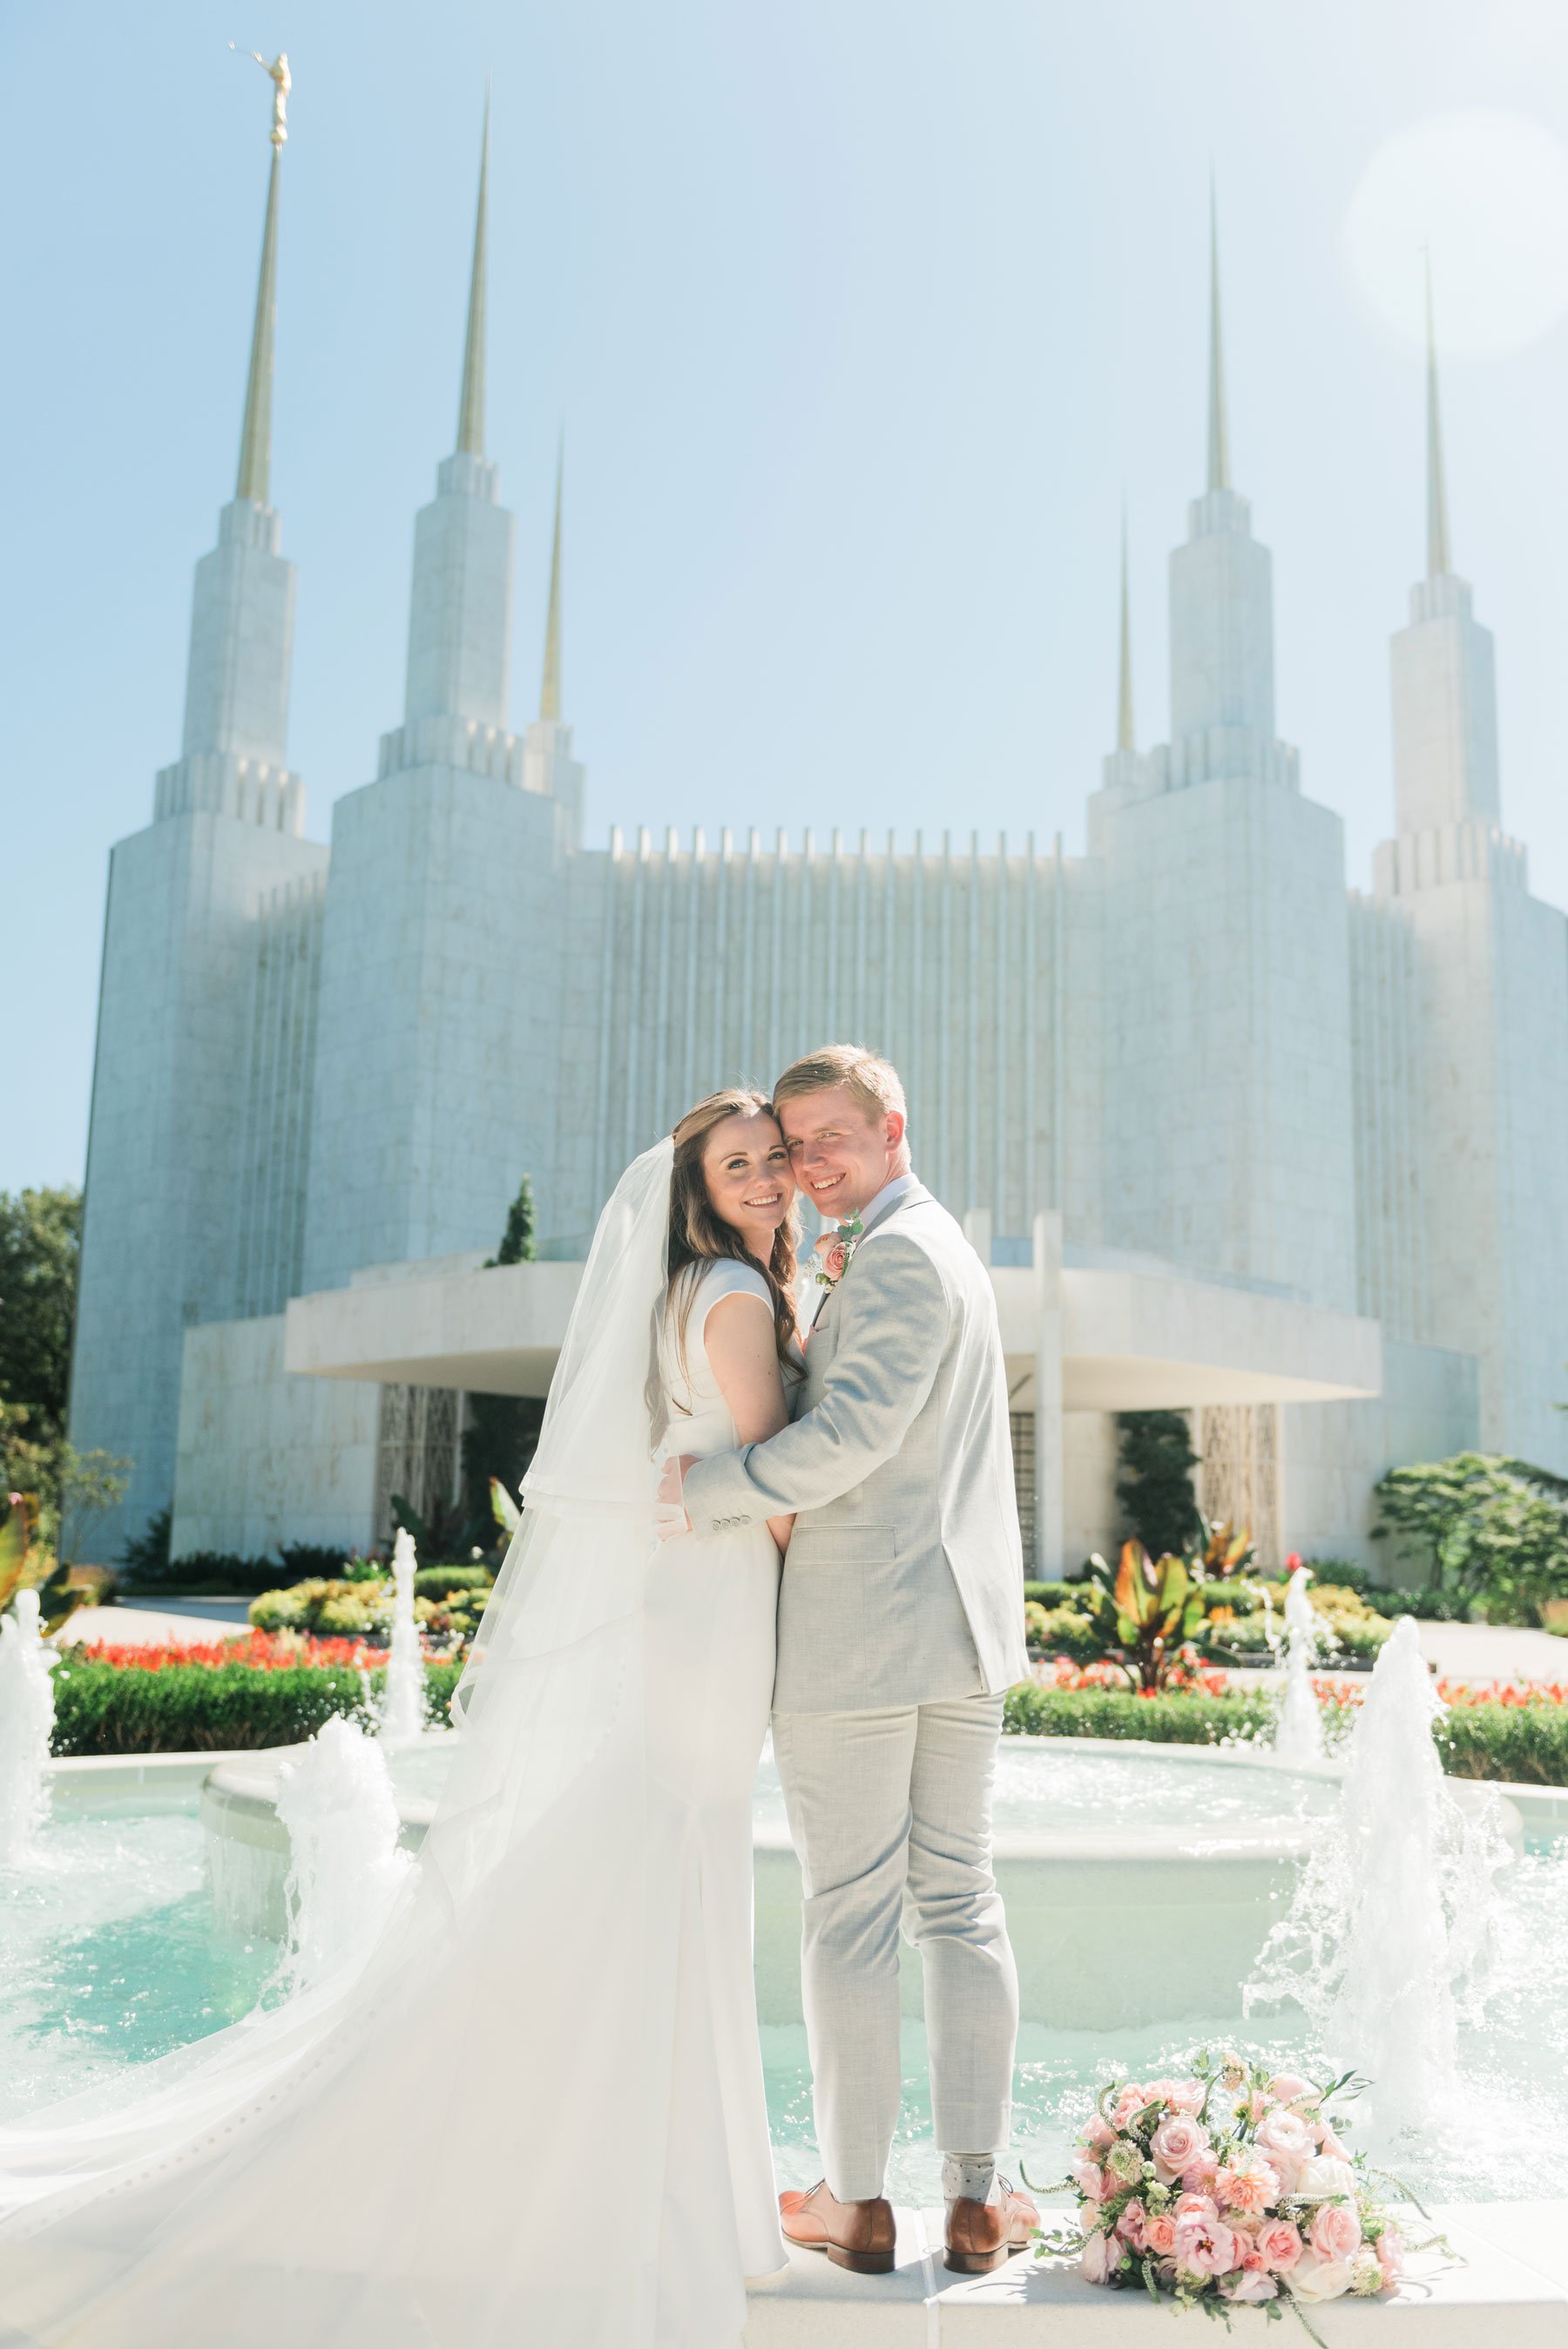    The washington d.c. LDS temple shines in this wedding day portrait in front of the fountain. #washingtondctemple #washingtondcweddingphotographer #dcwedding #pinkwedding #ldsweddingphotographer #pinkweddingbouquet #washingtondctempleexit #eastcoas